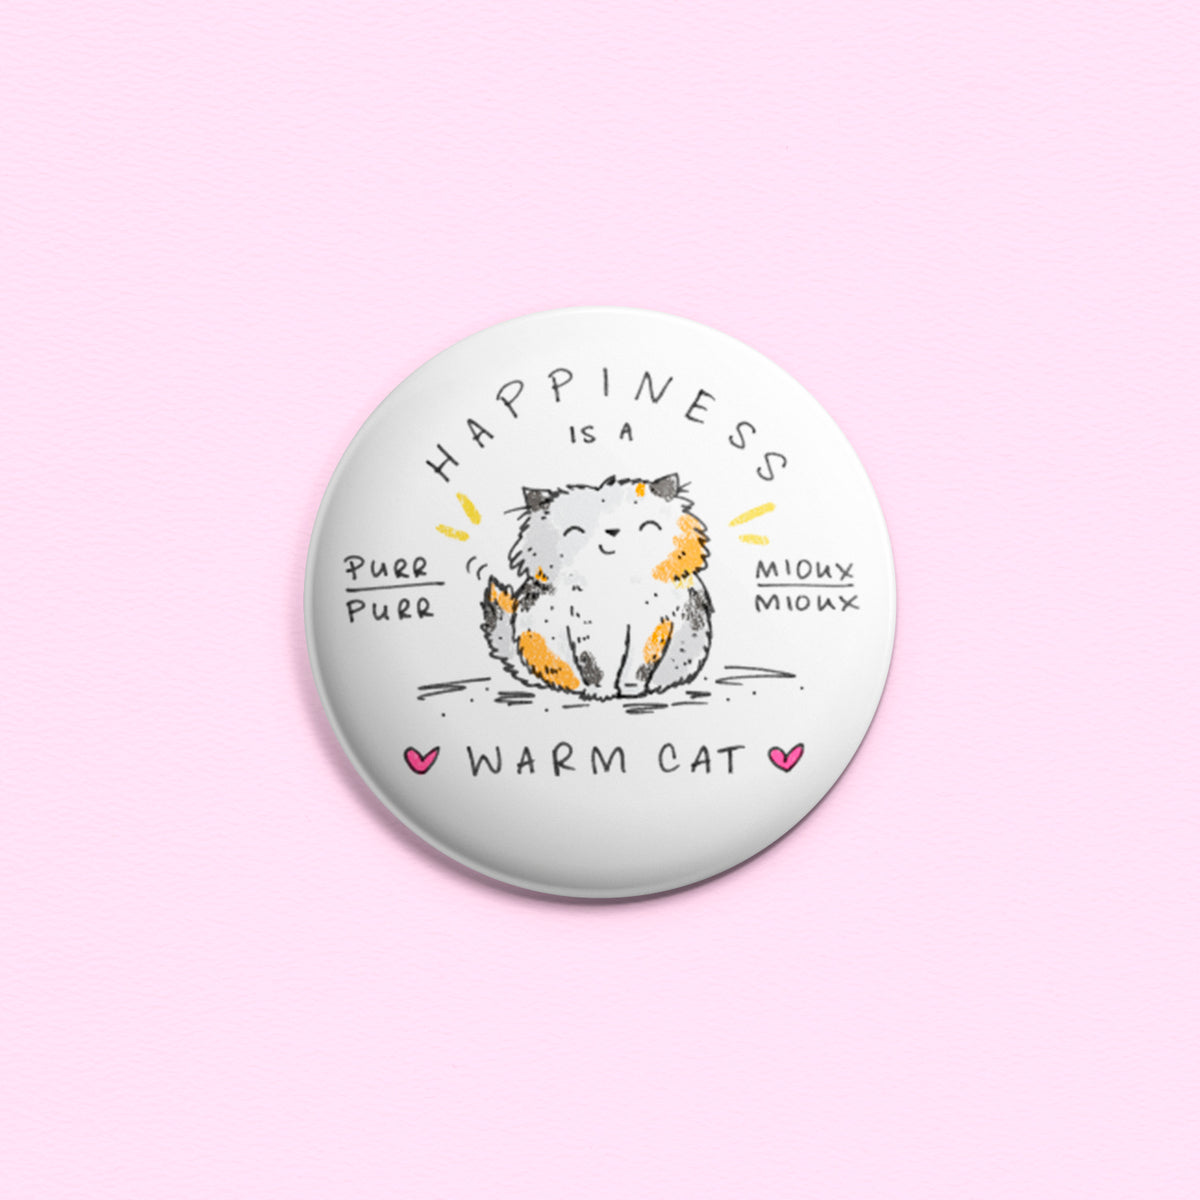 Happiness Is A Warm Cat - Button or magnet with a drawing of a happy calico cat.